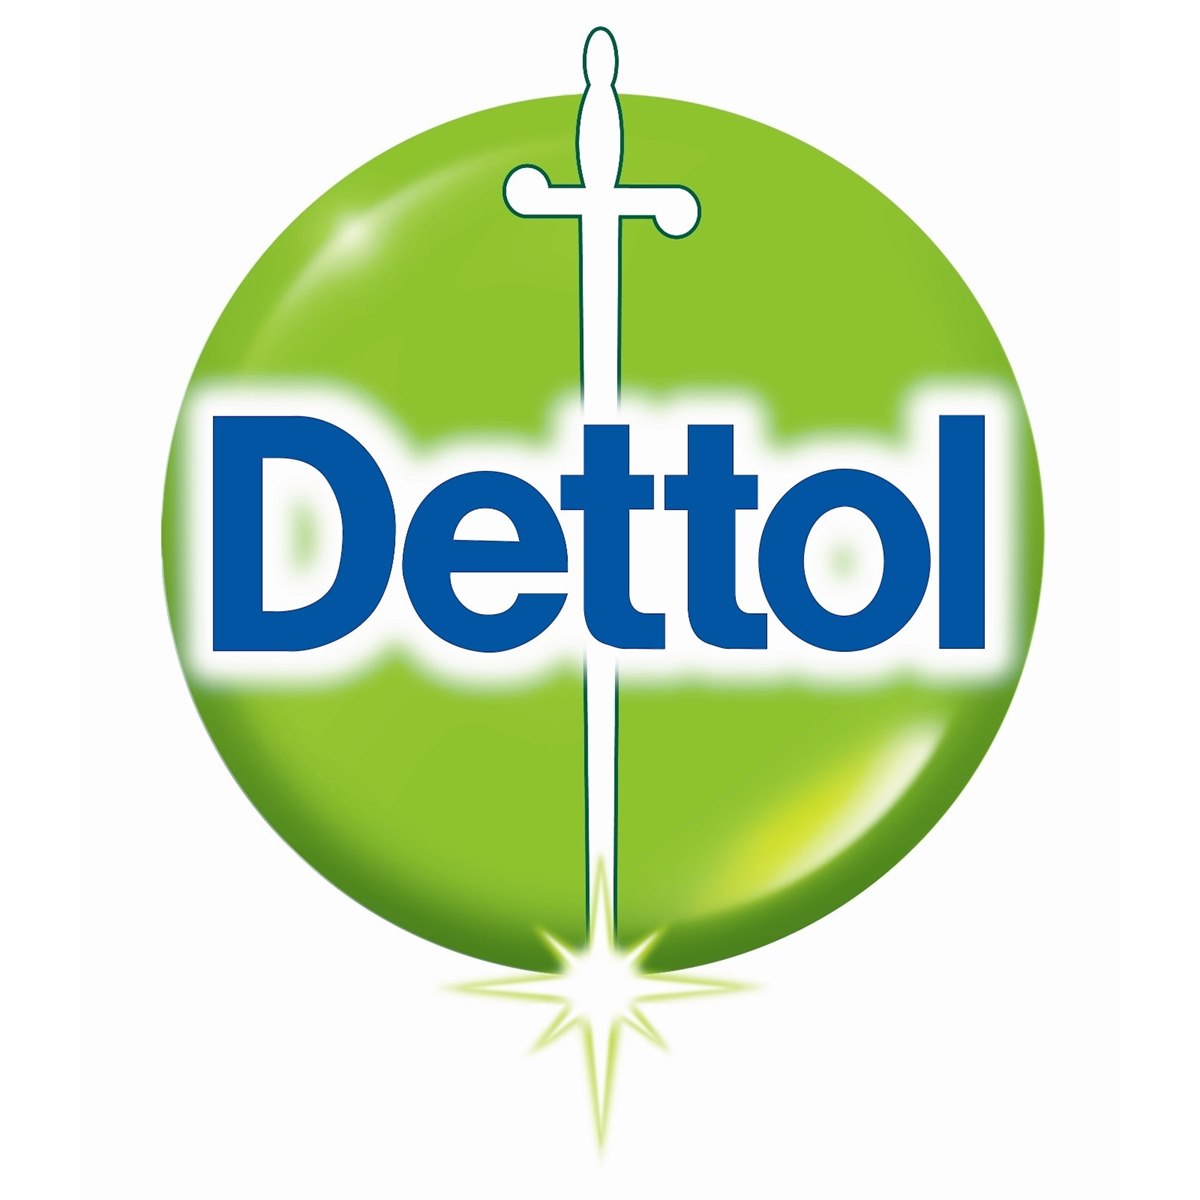 Where to Buy Dettol Products